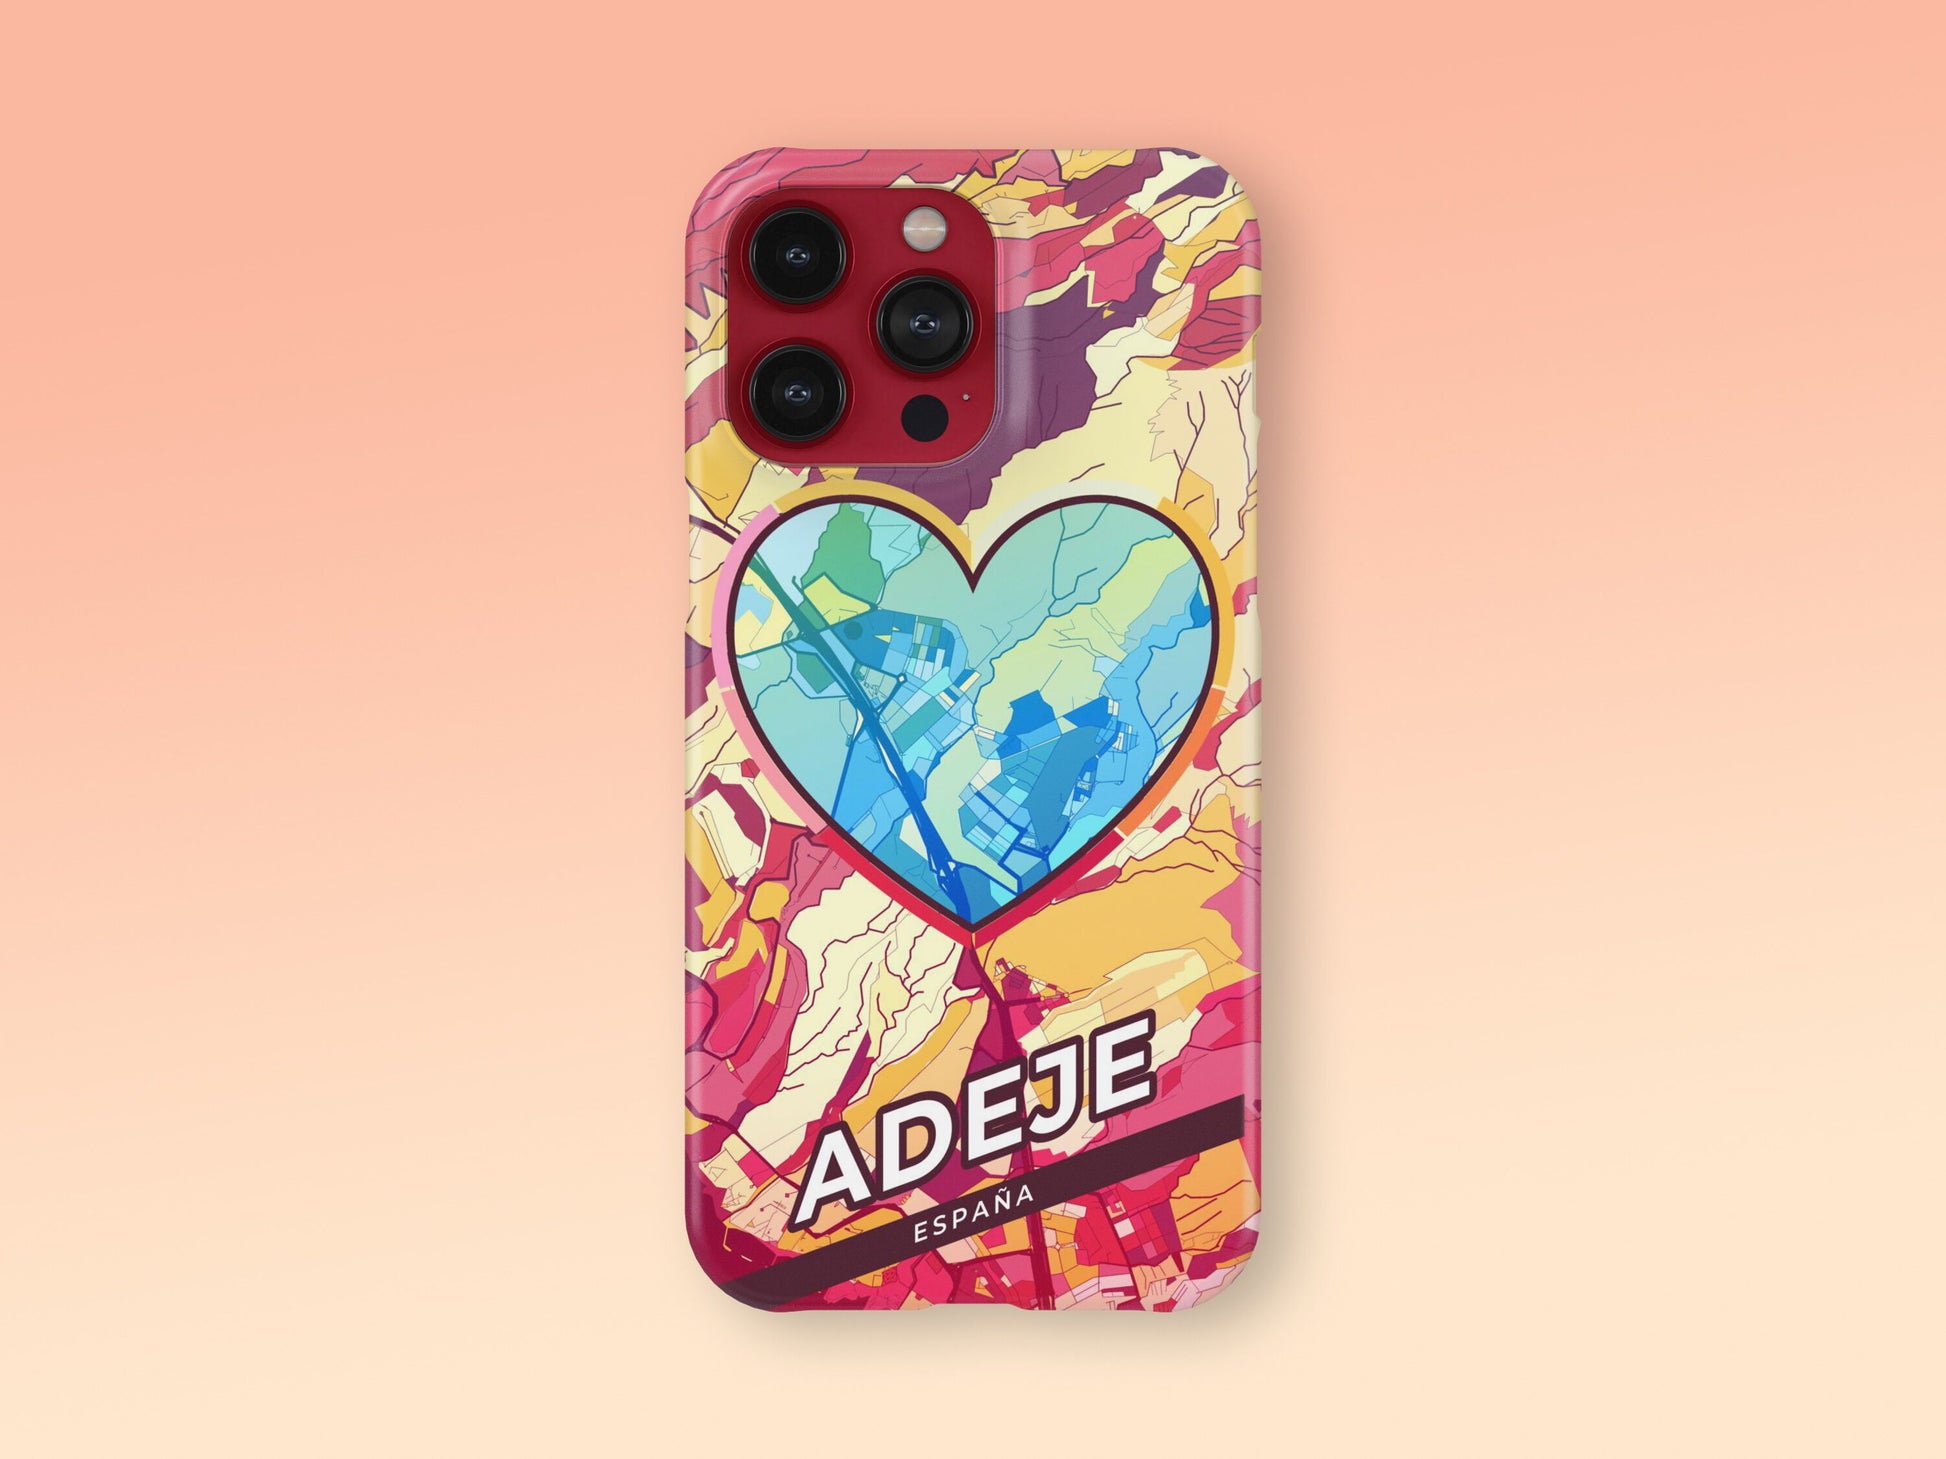 Adeje Spain slim phone case with colorful icon. Birthday, wedding or housewarming gift. Couple match cases. 2